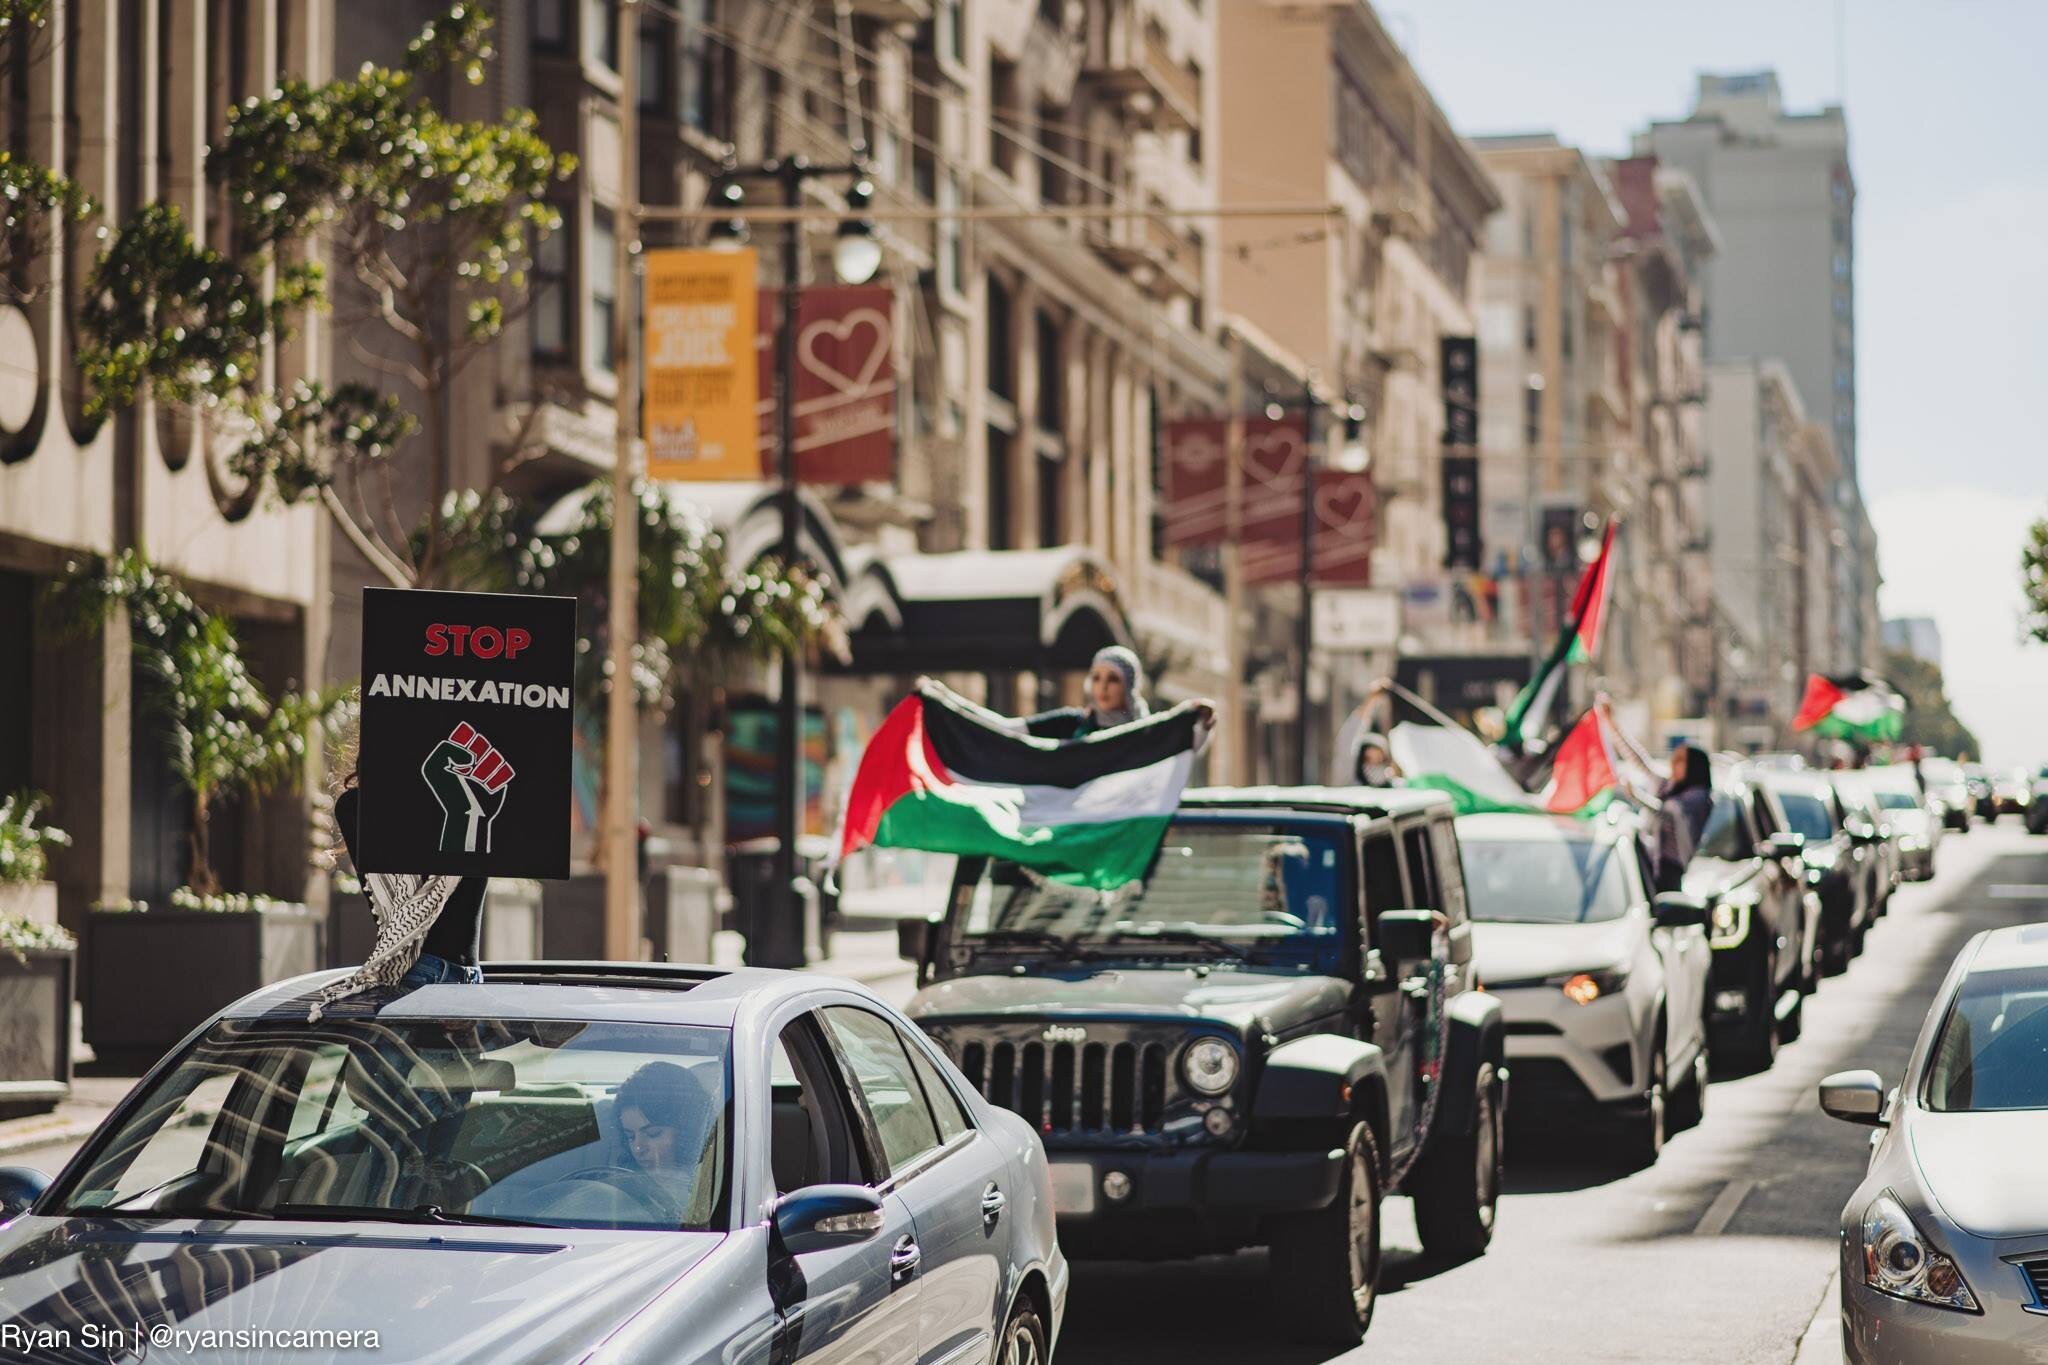  On July 2, 2020, advocates for Palestinian freedom in the SF Bay Area organized a caravan of over 500 to protest Israel’s threats to annex more land in the occupied West Bank. (Credit: Ryan Sin) 